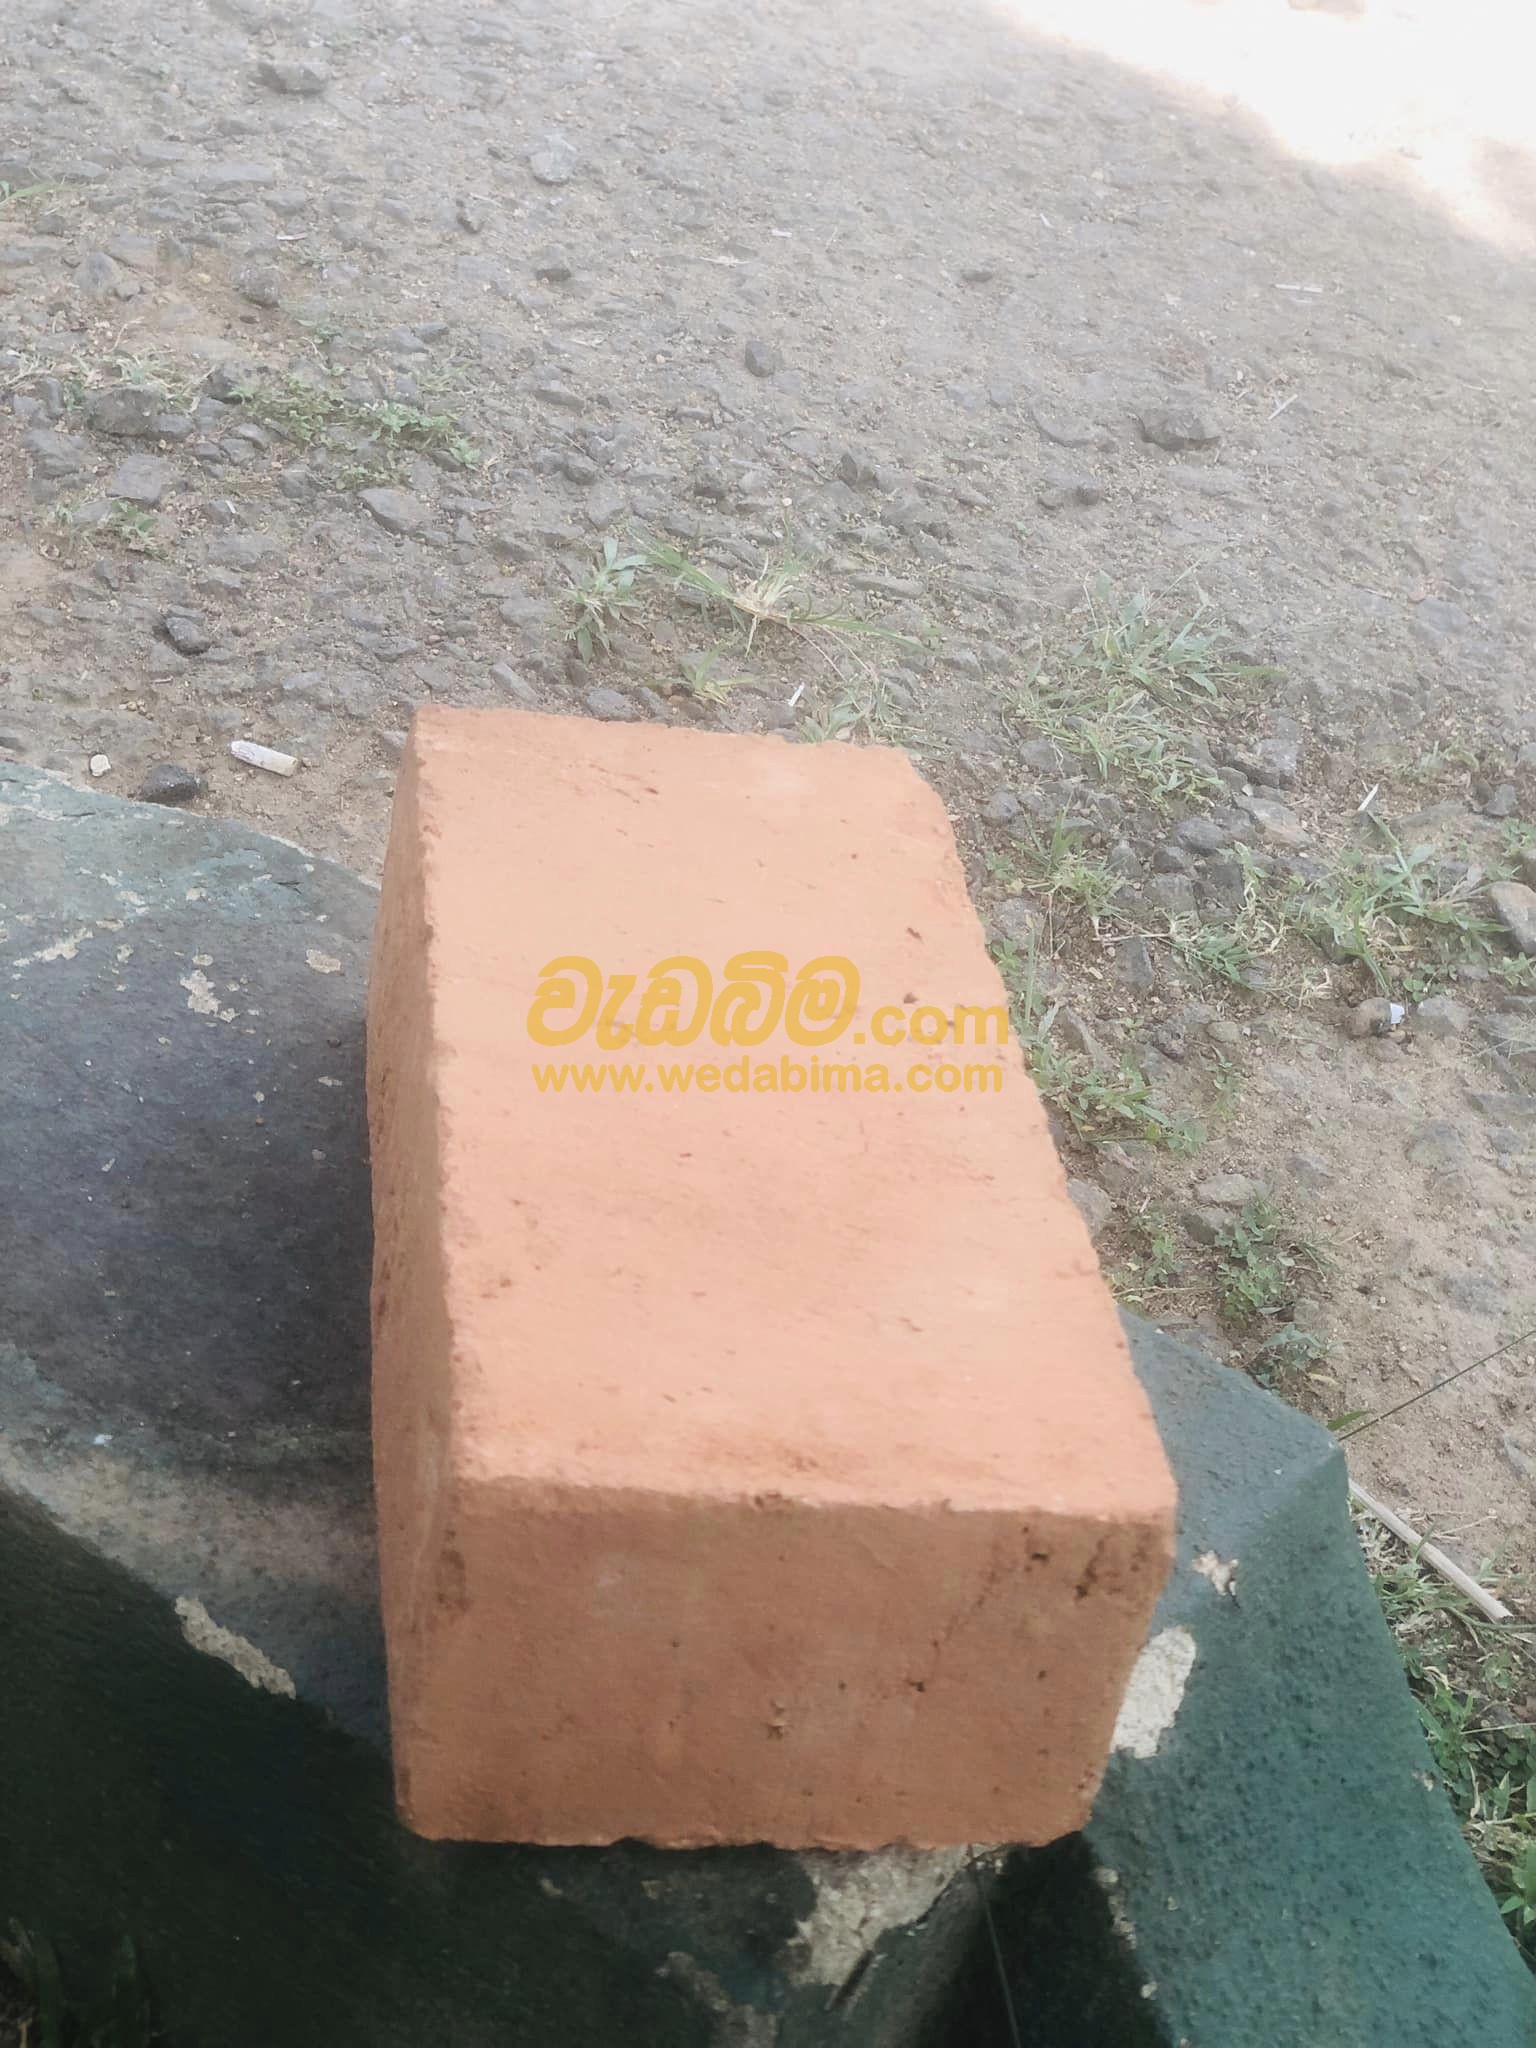 Cover image for Engineering Brick Suppliers in Sri Lanka